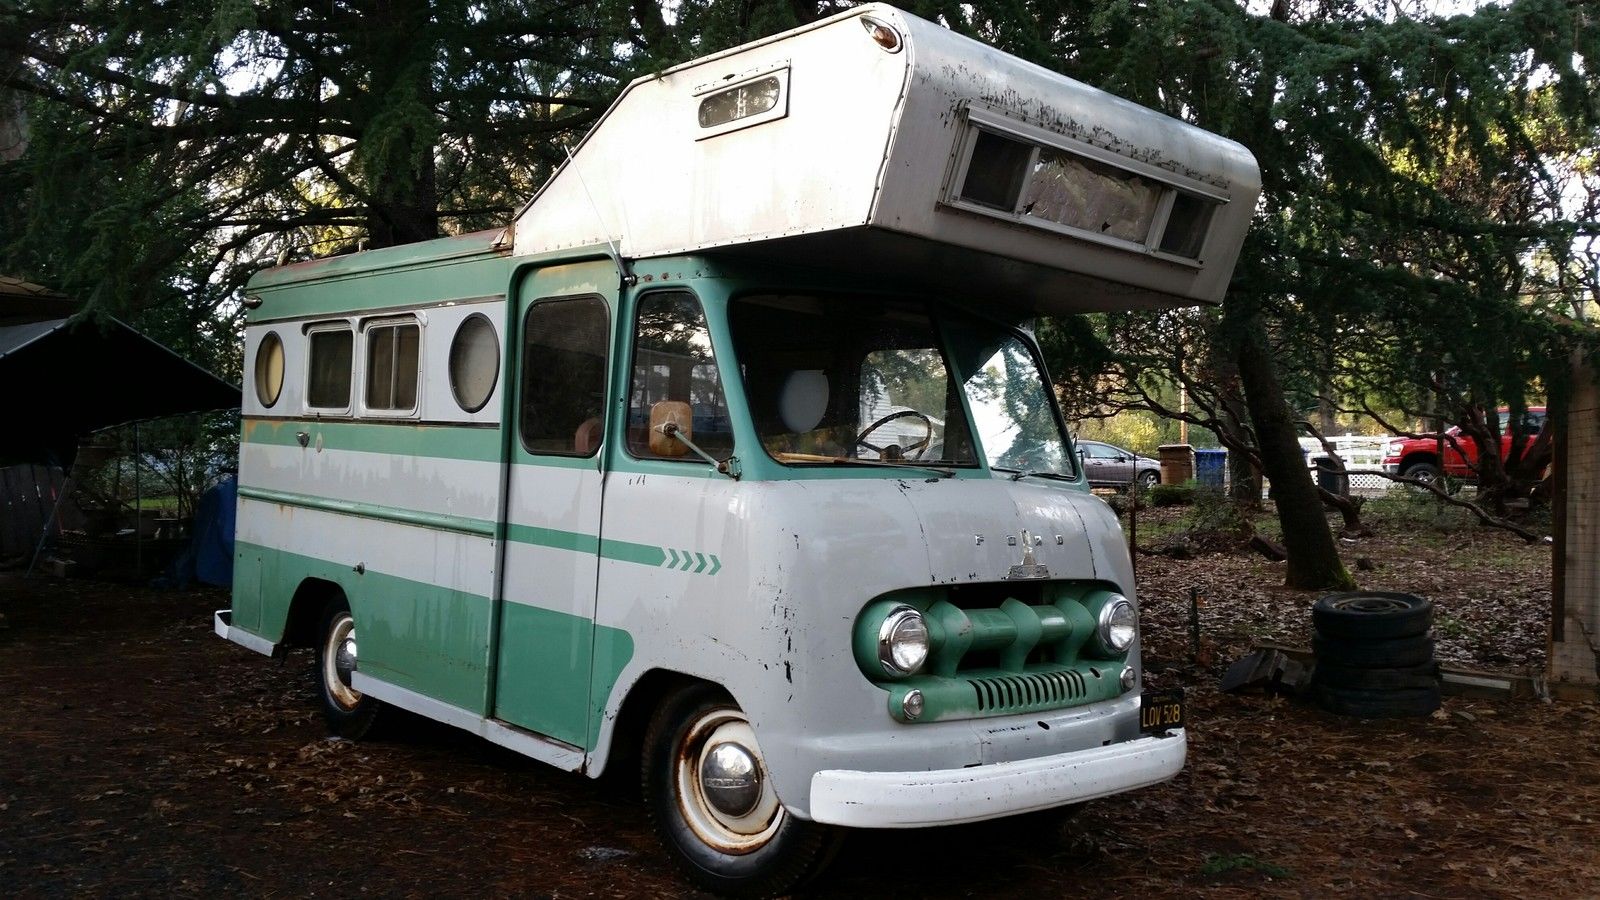 This 1951 Boyertown Tour Wagon Has A Weird Engine, Is In Immaculate Shape, And May Be The Coolest Old RV We Have Seen